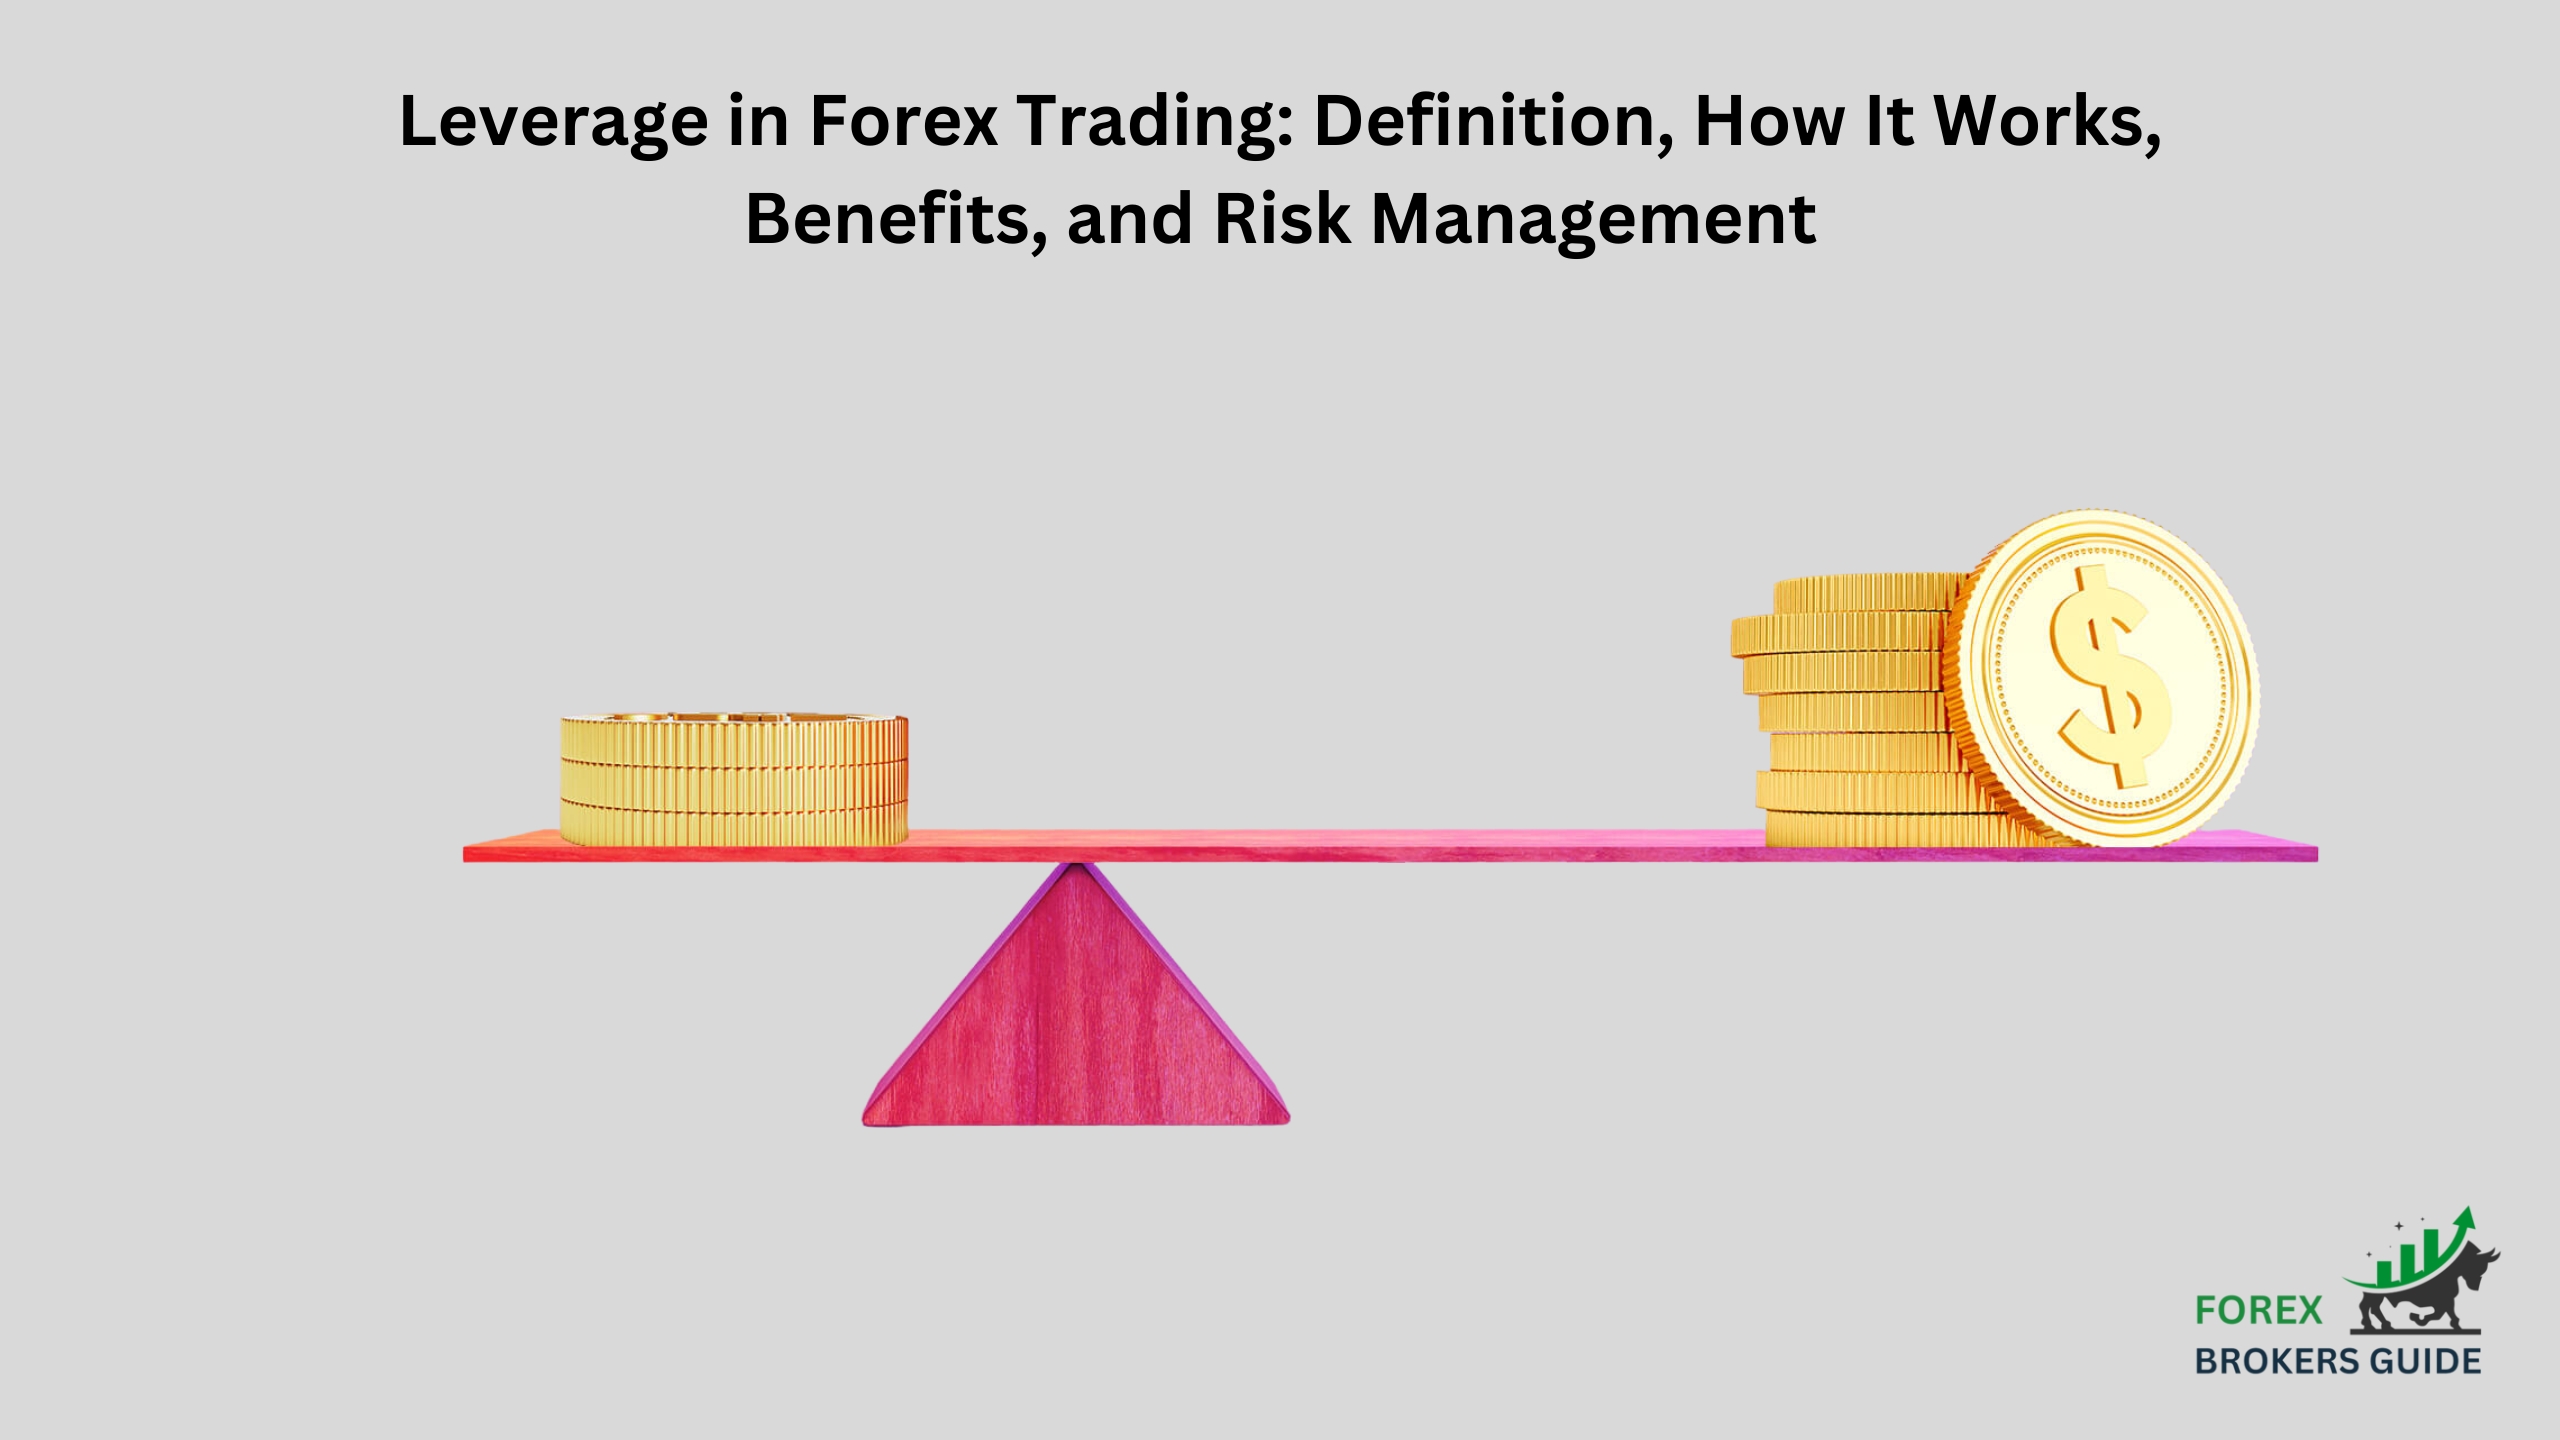 Leverage in Forex Trading Definition, How It Works, Benefits, and Risk Management